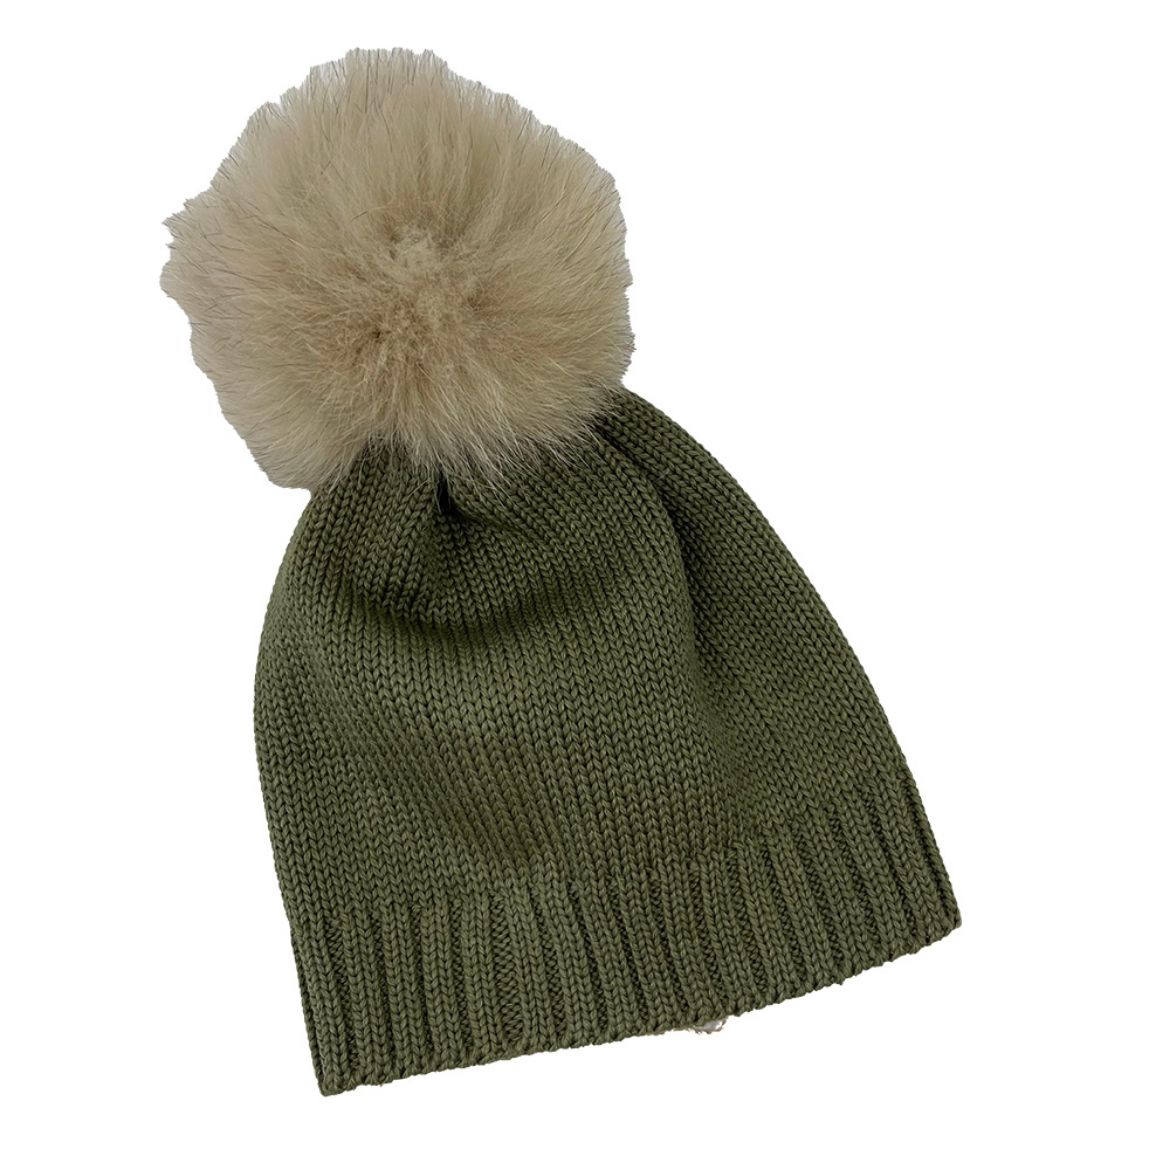 Picture of Bimbalo Boys Green Knitted Hat with Fur Pom